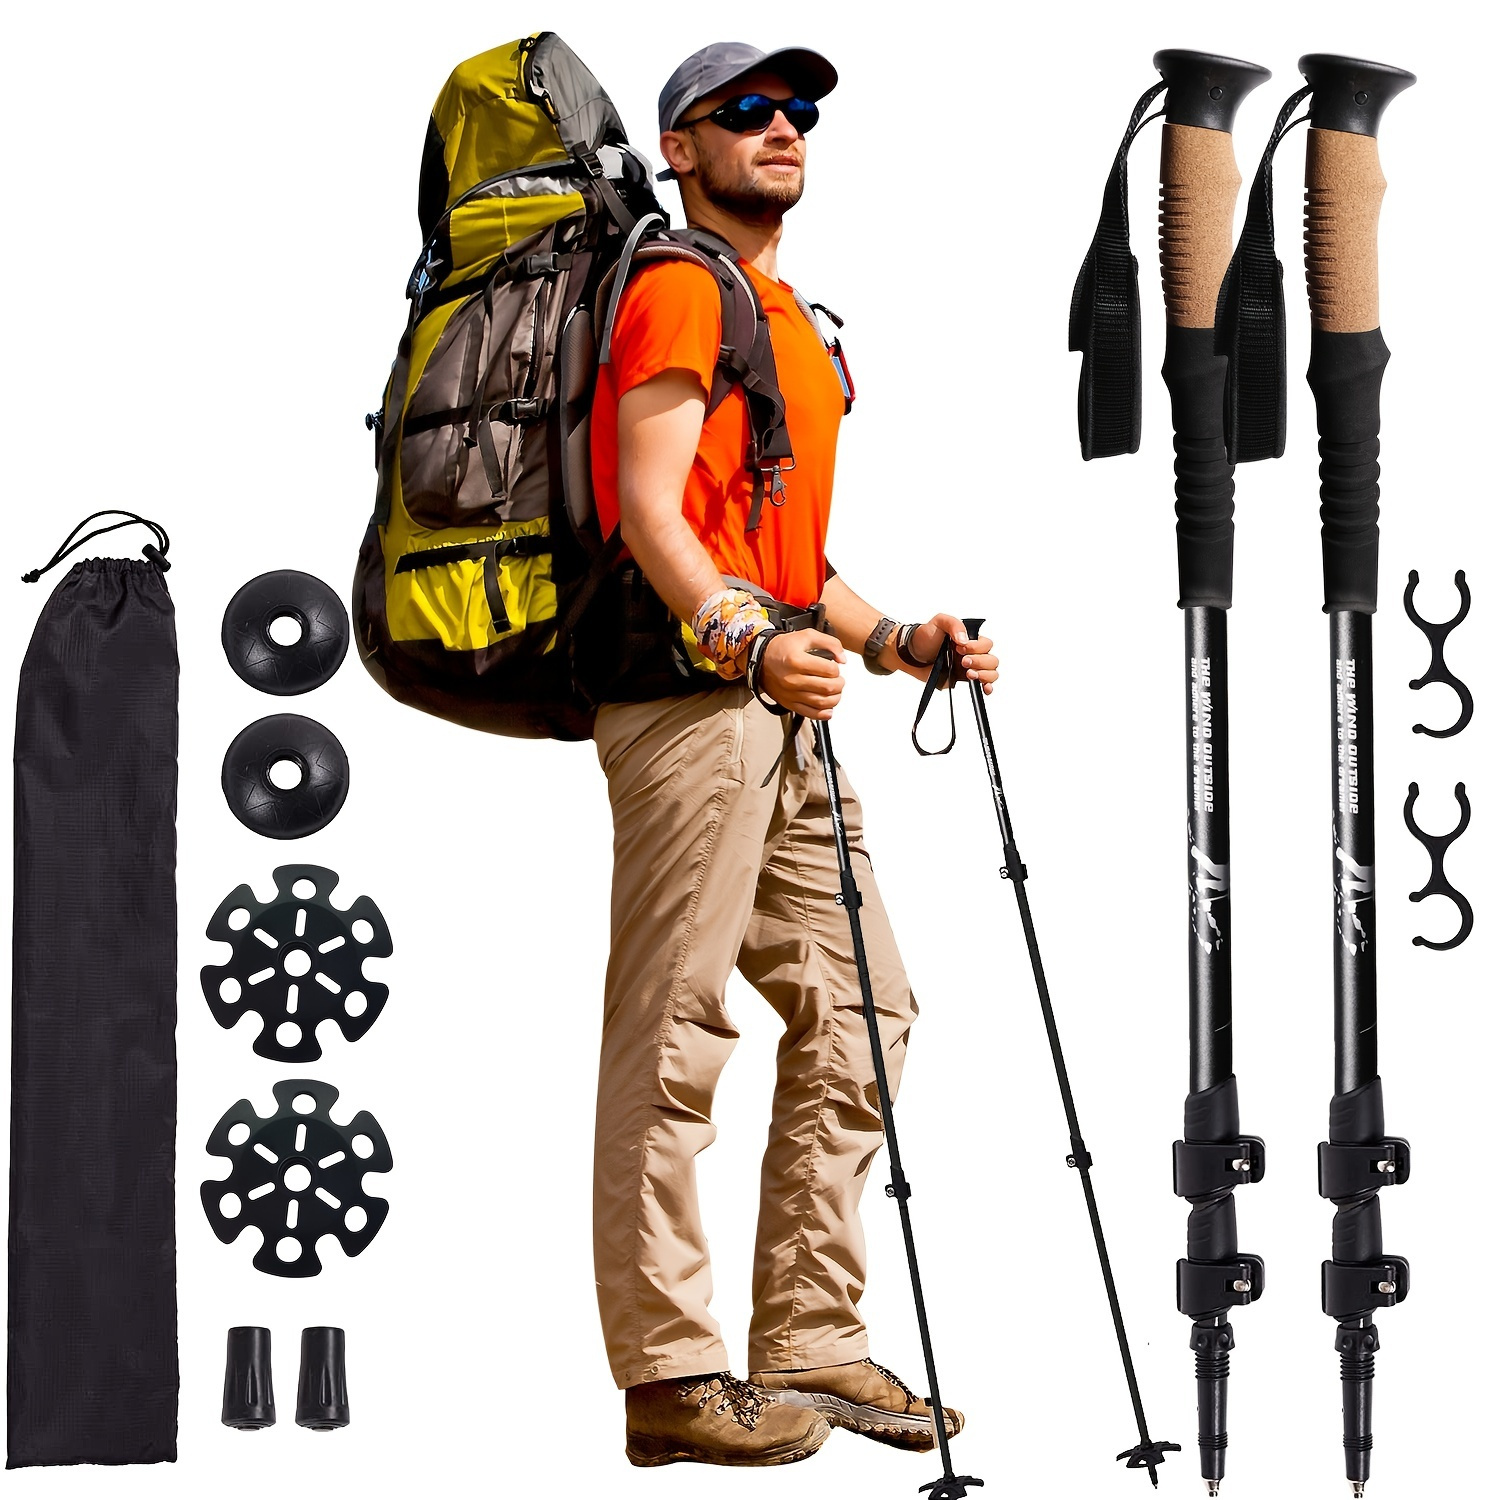 

2pcs Durable Telescopic Multifunctional Aluminum Trekking Pole - Perfect For Mountaineering, Hiking, Camping, Fishing & Outdoor Activities!